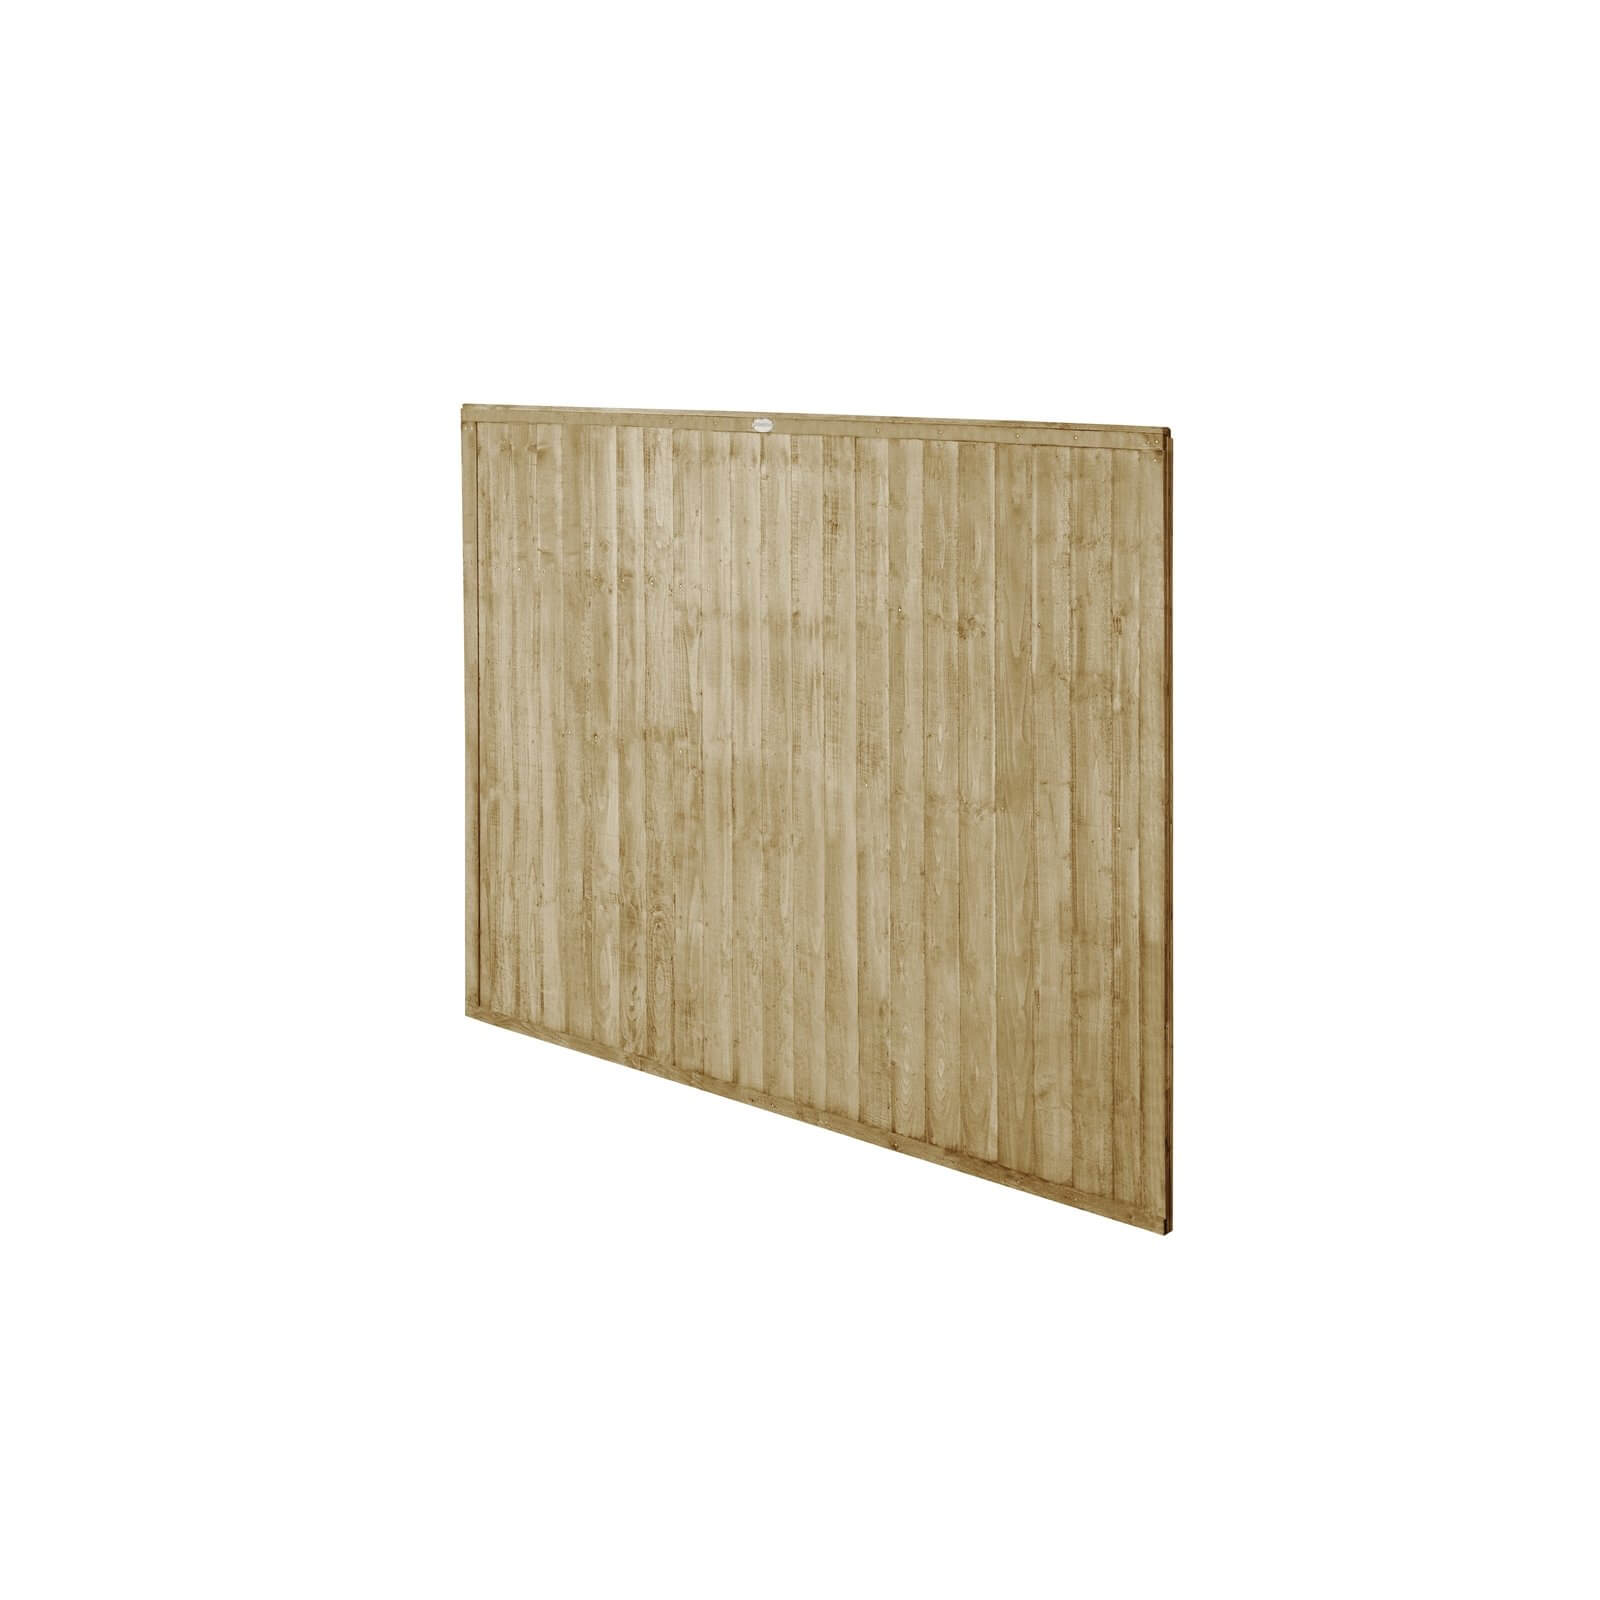 6ft x 5ft (1.83m x 1.52m) Pressure Treated Closeboard Fence Panel - Pack of 5